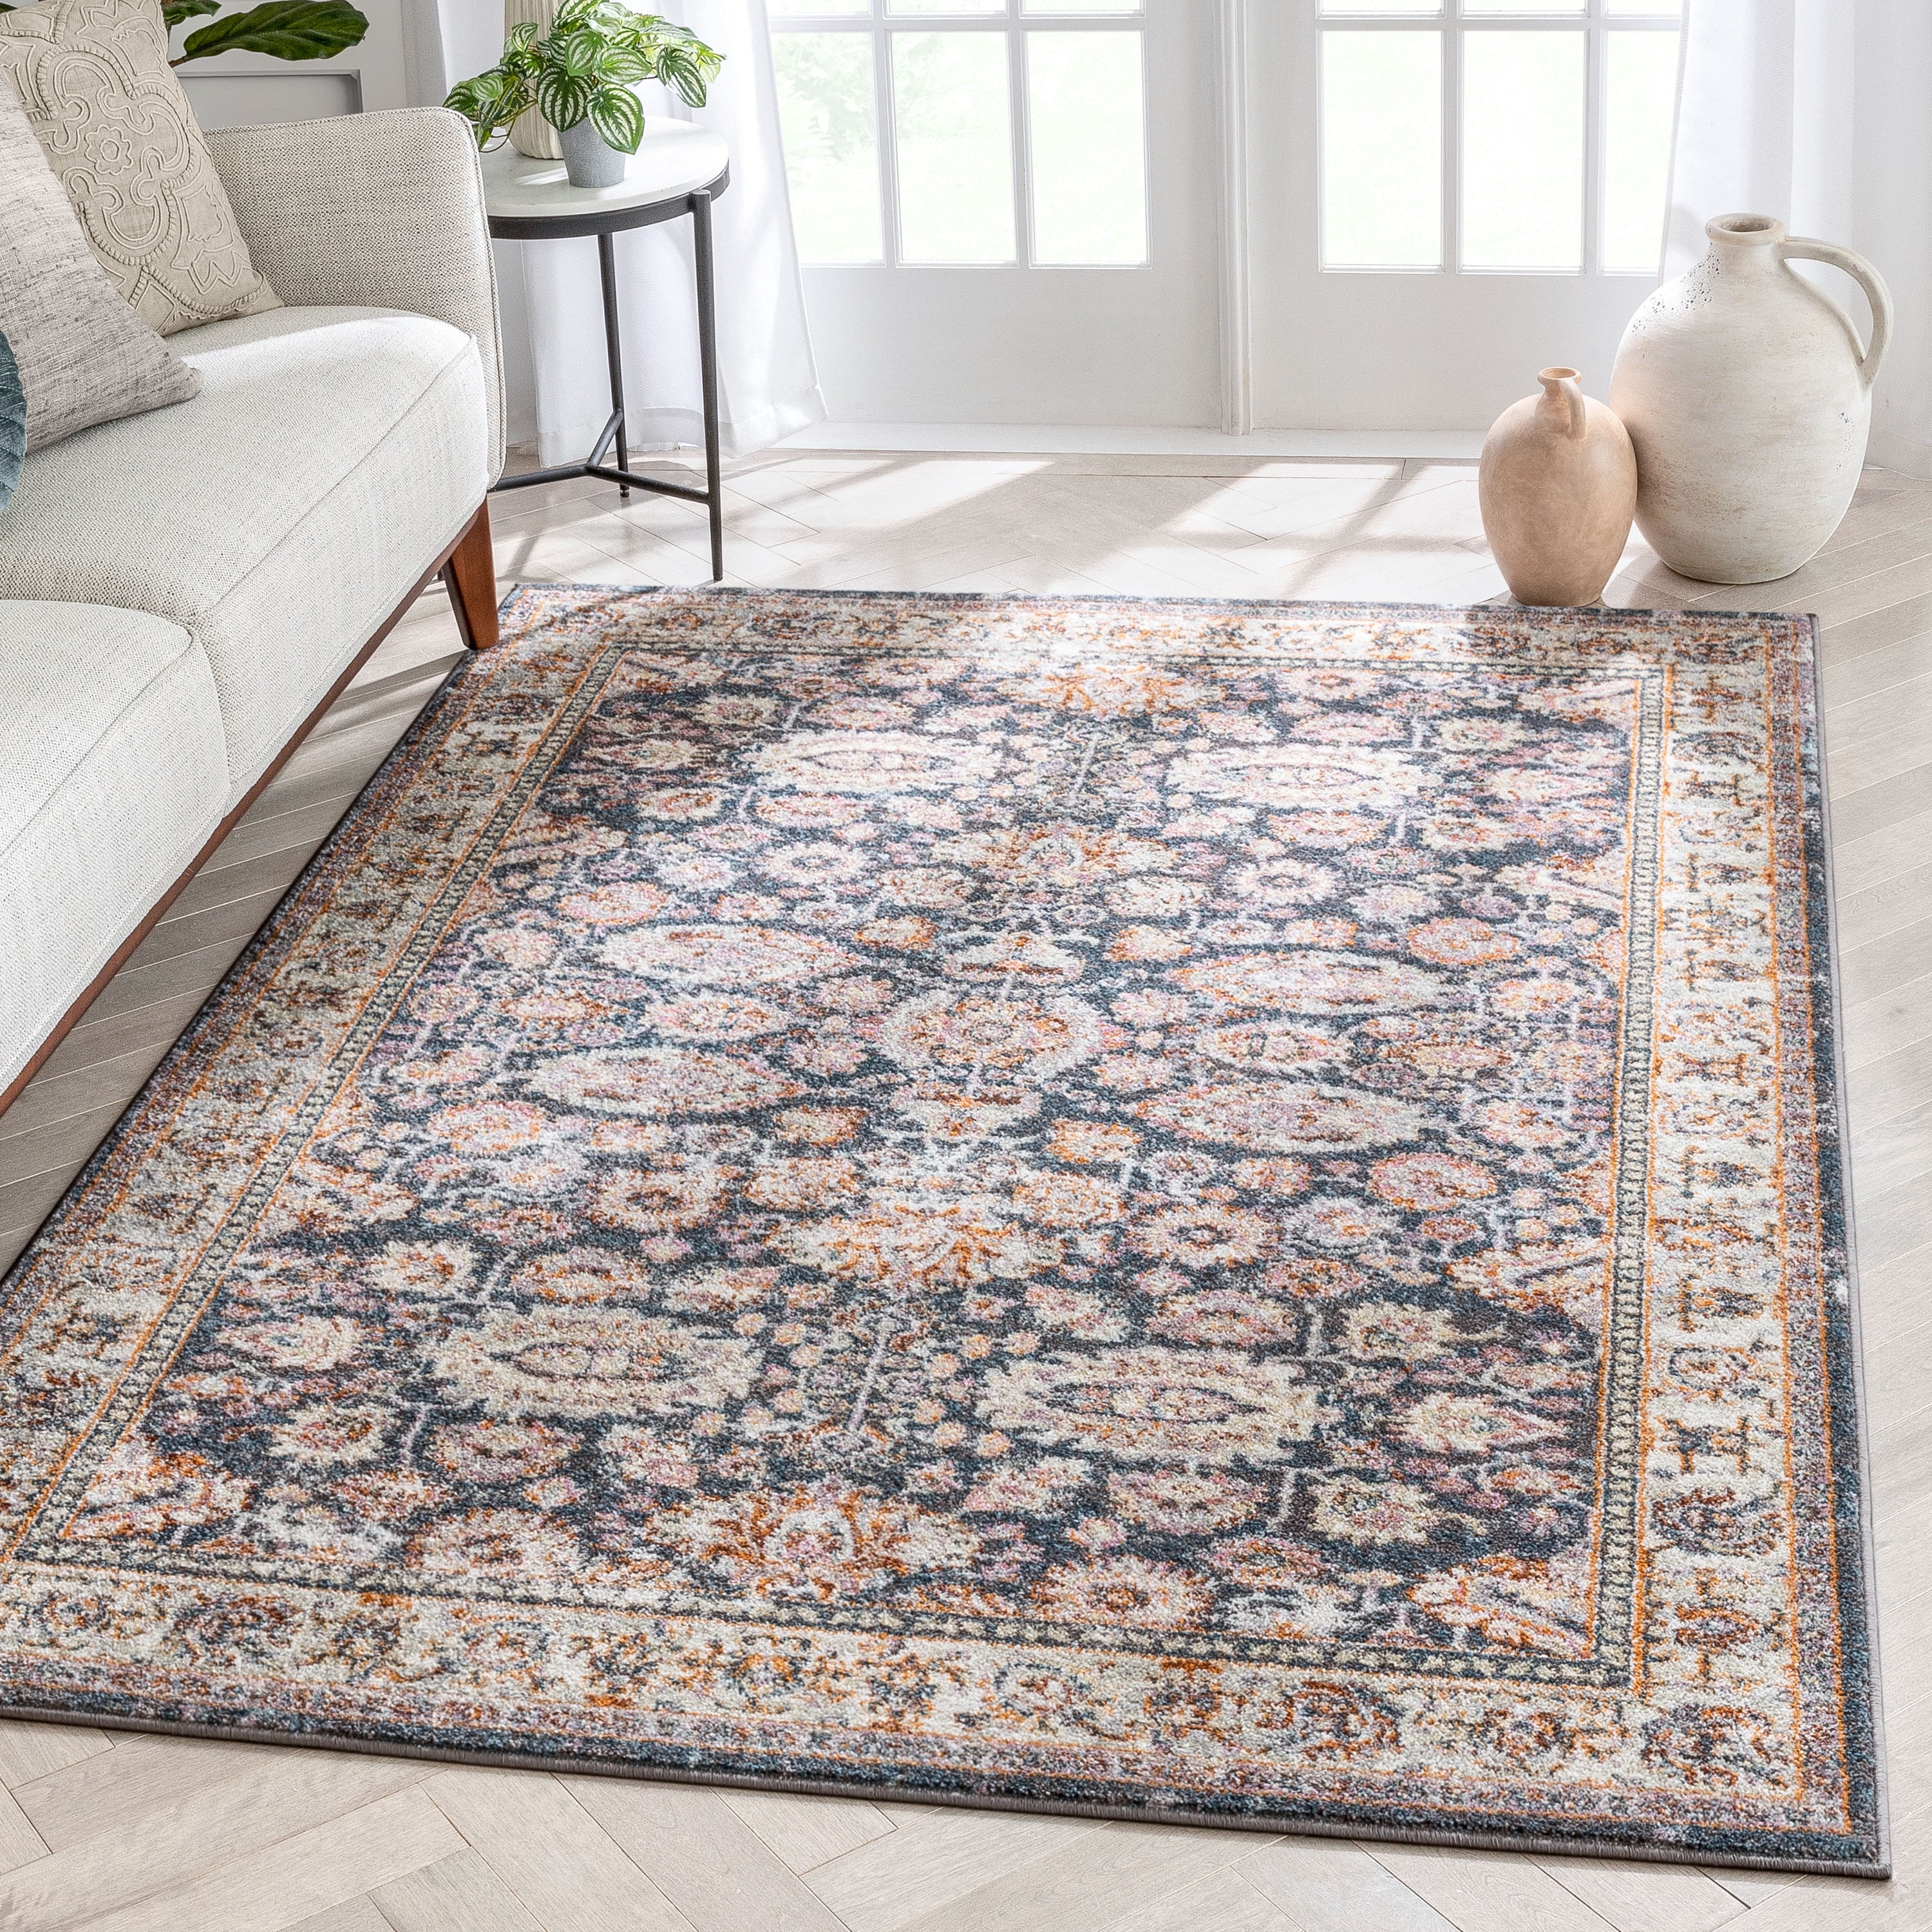 Capitol Importing 65-081BP Bear Paw Oval Patch Rug, 20 x 30 in.